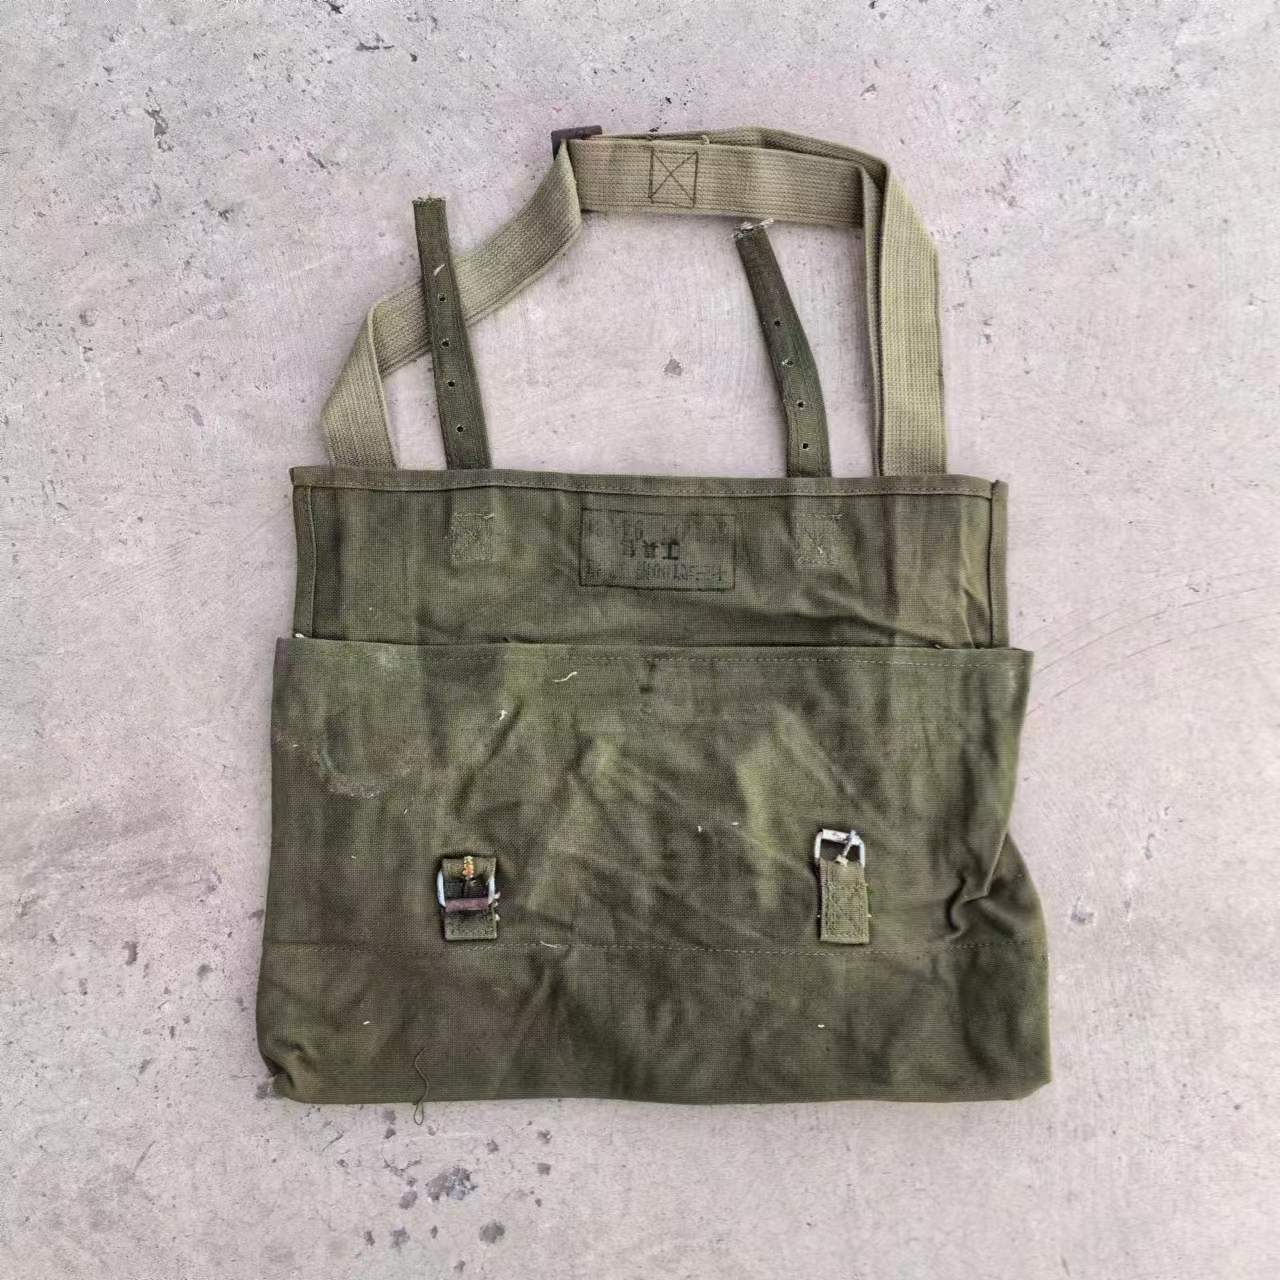 Chinese Military Surplus Type 73 Magazine Ammo Pouch Expansion Bag Toolkit